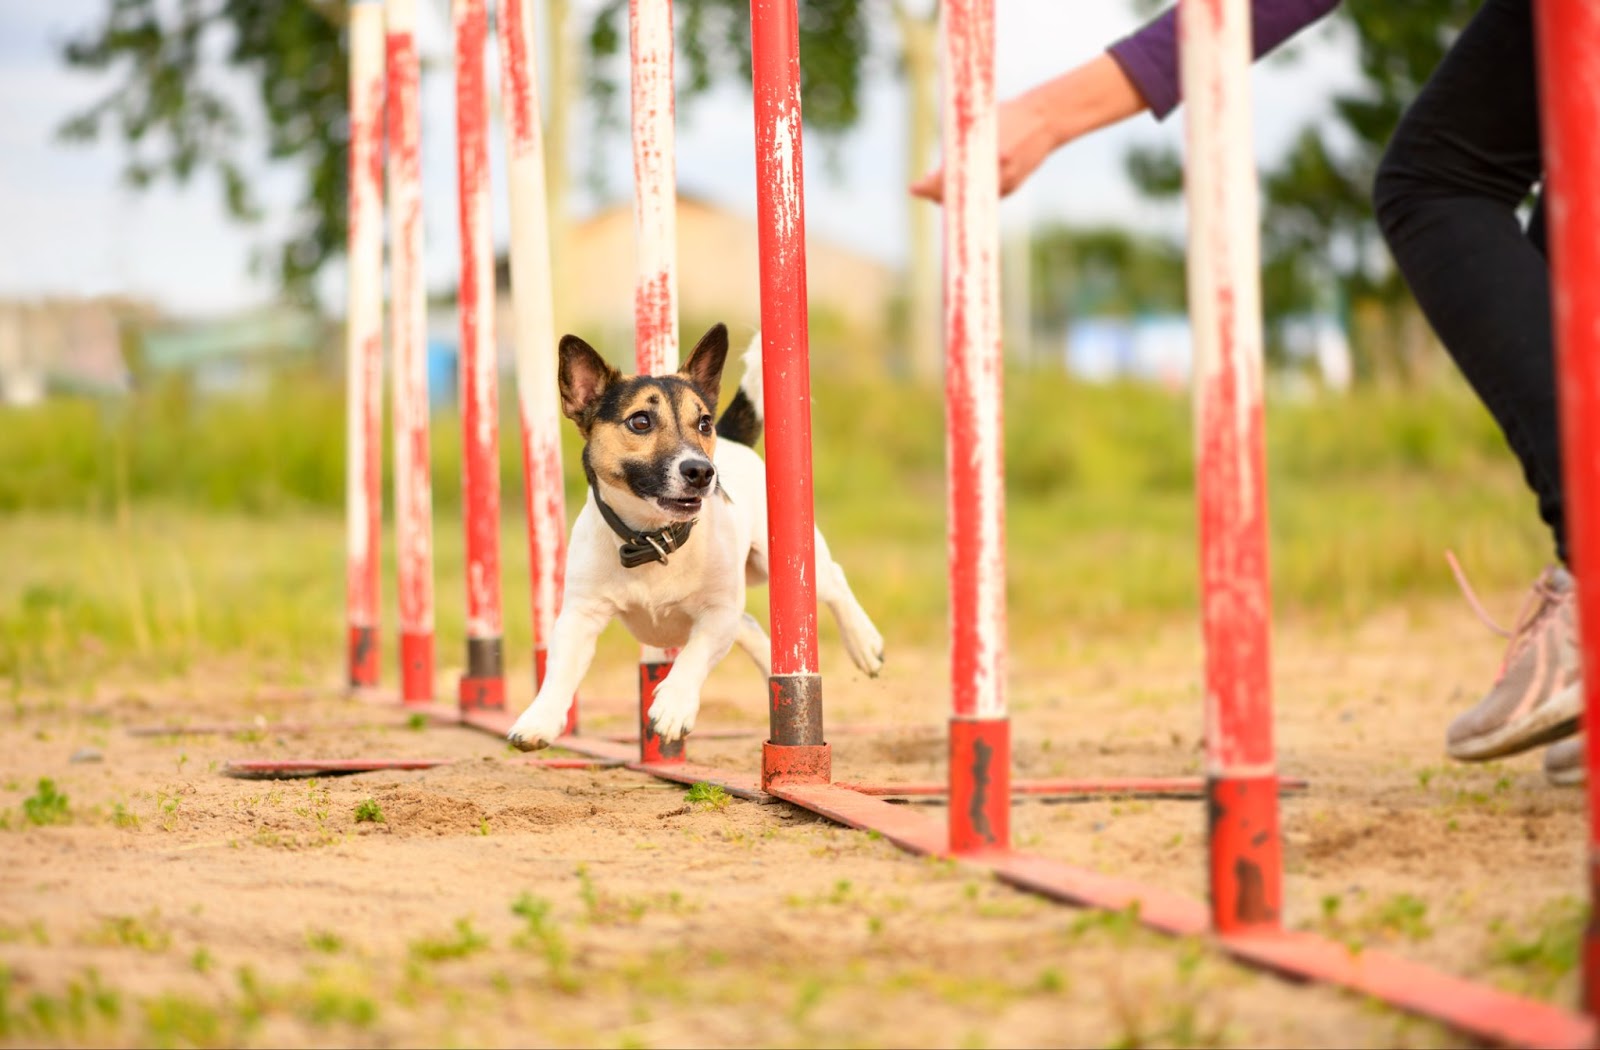 Jack Russell Terrier is overcoming the slalom for dog training